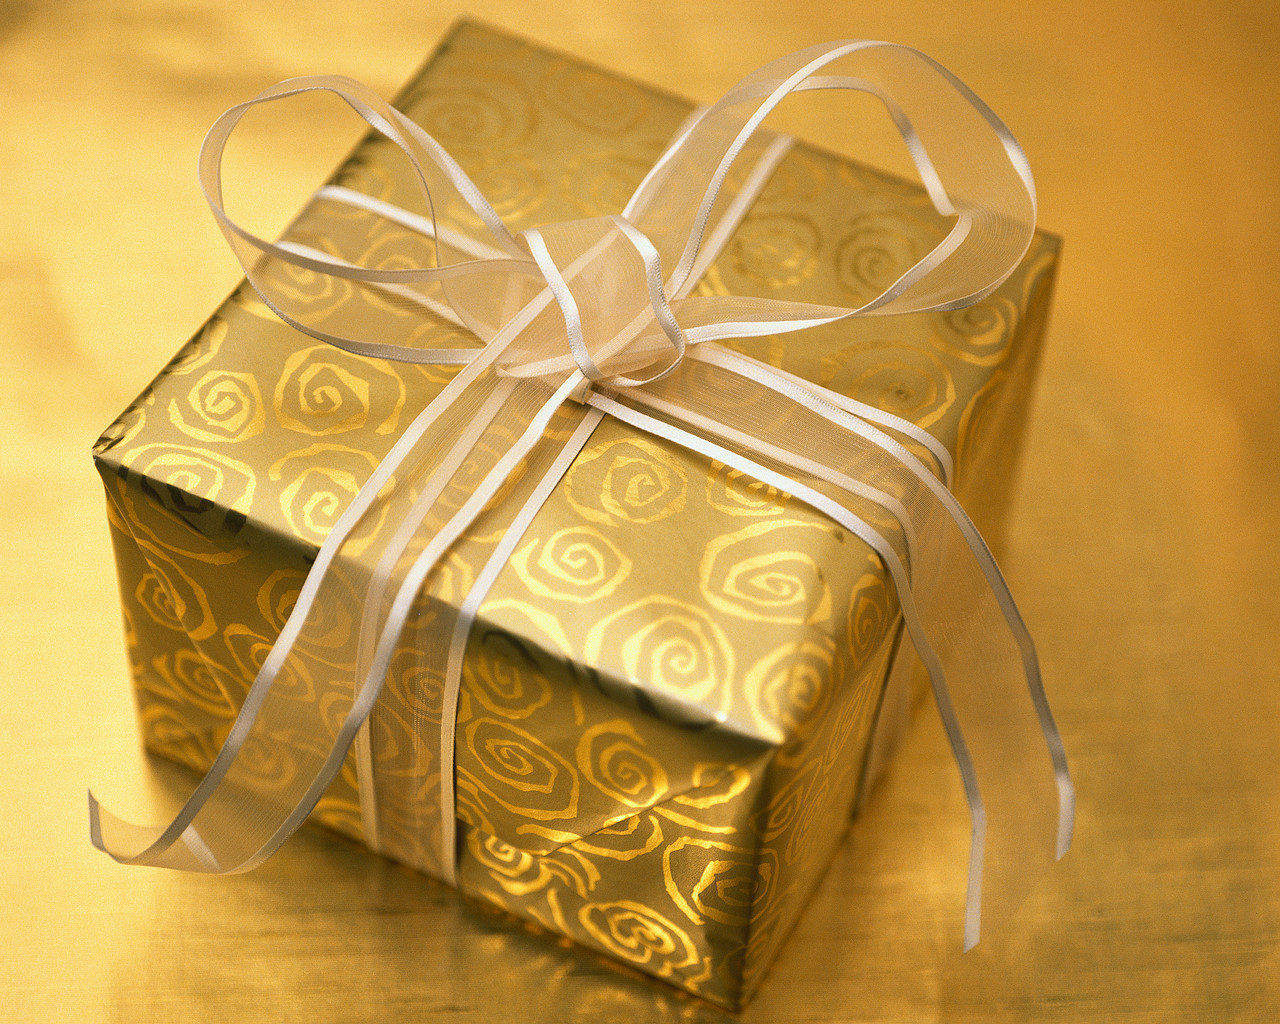 Tips on finding the perfect gifts for everyone